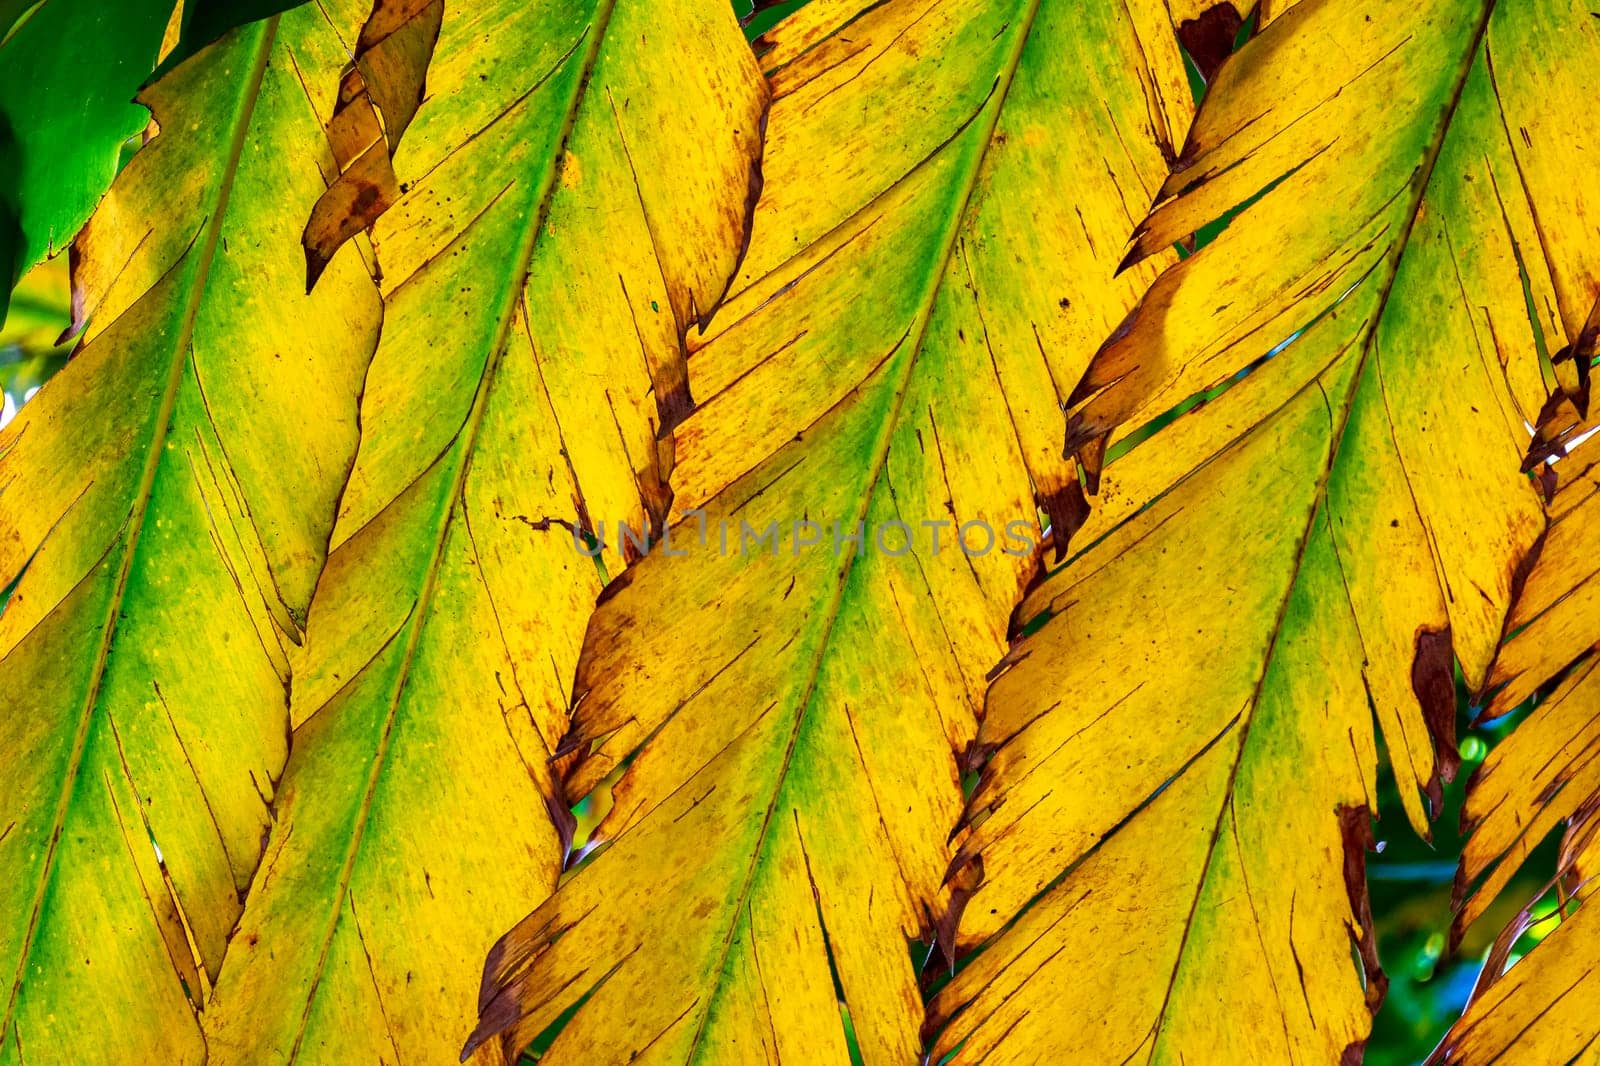 Texture of leaves backlit by Fred_Pinheiro